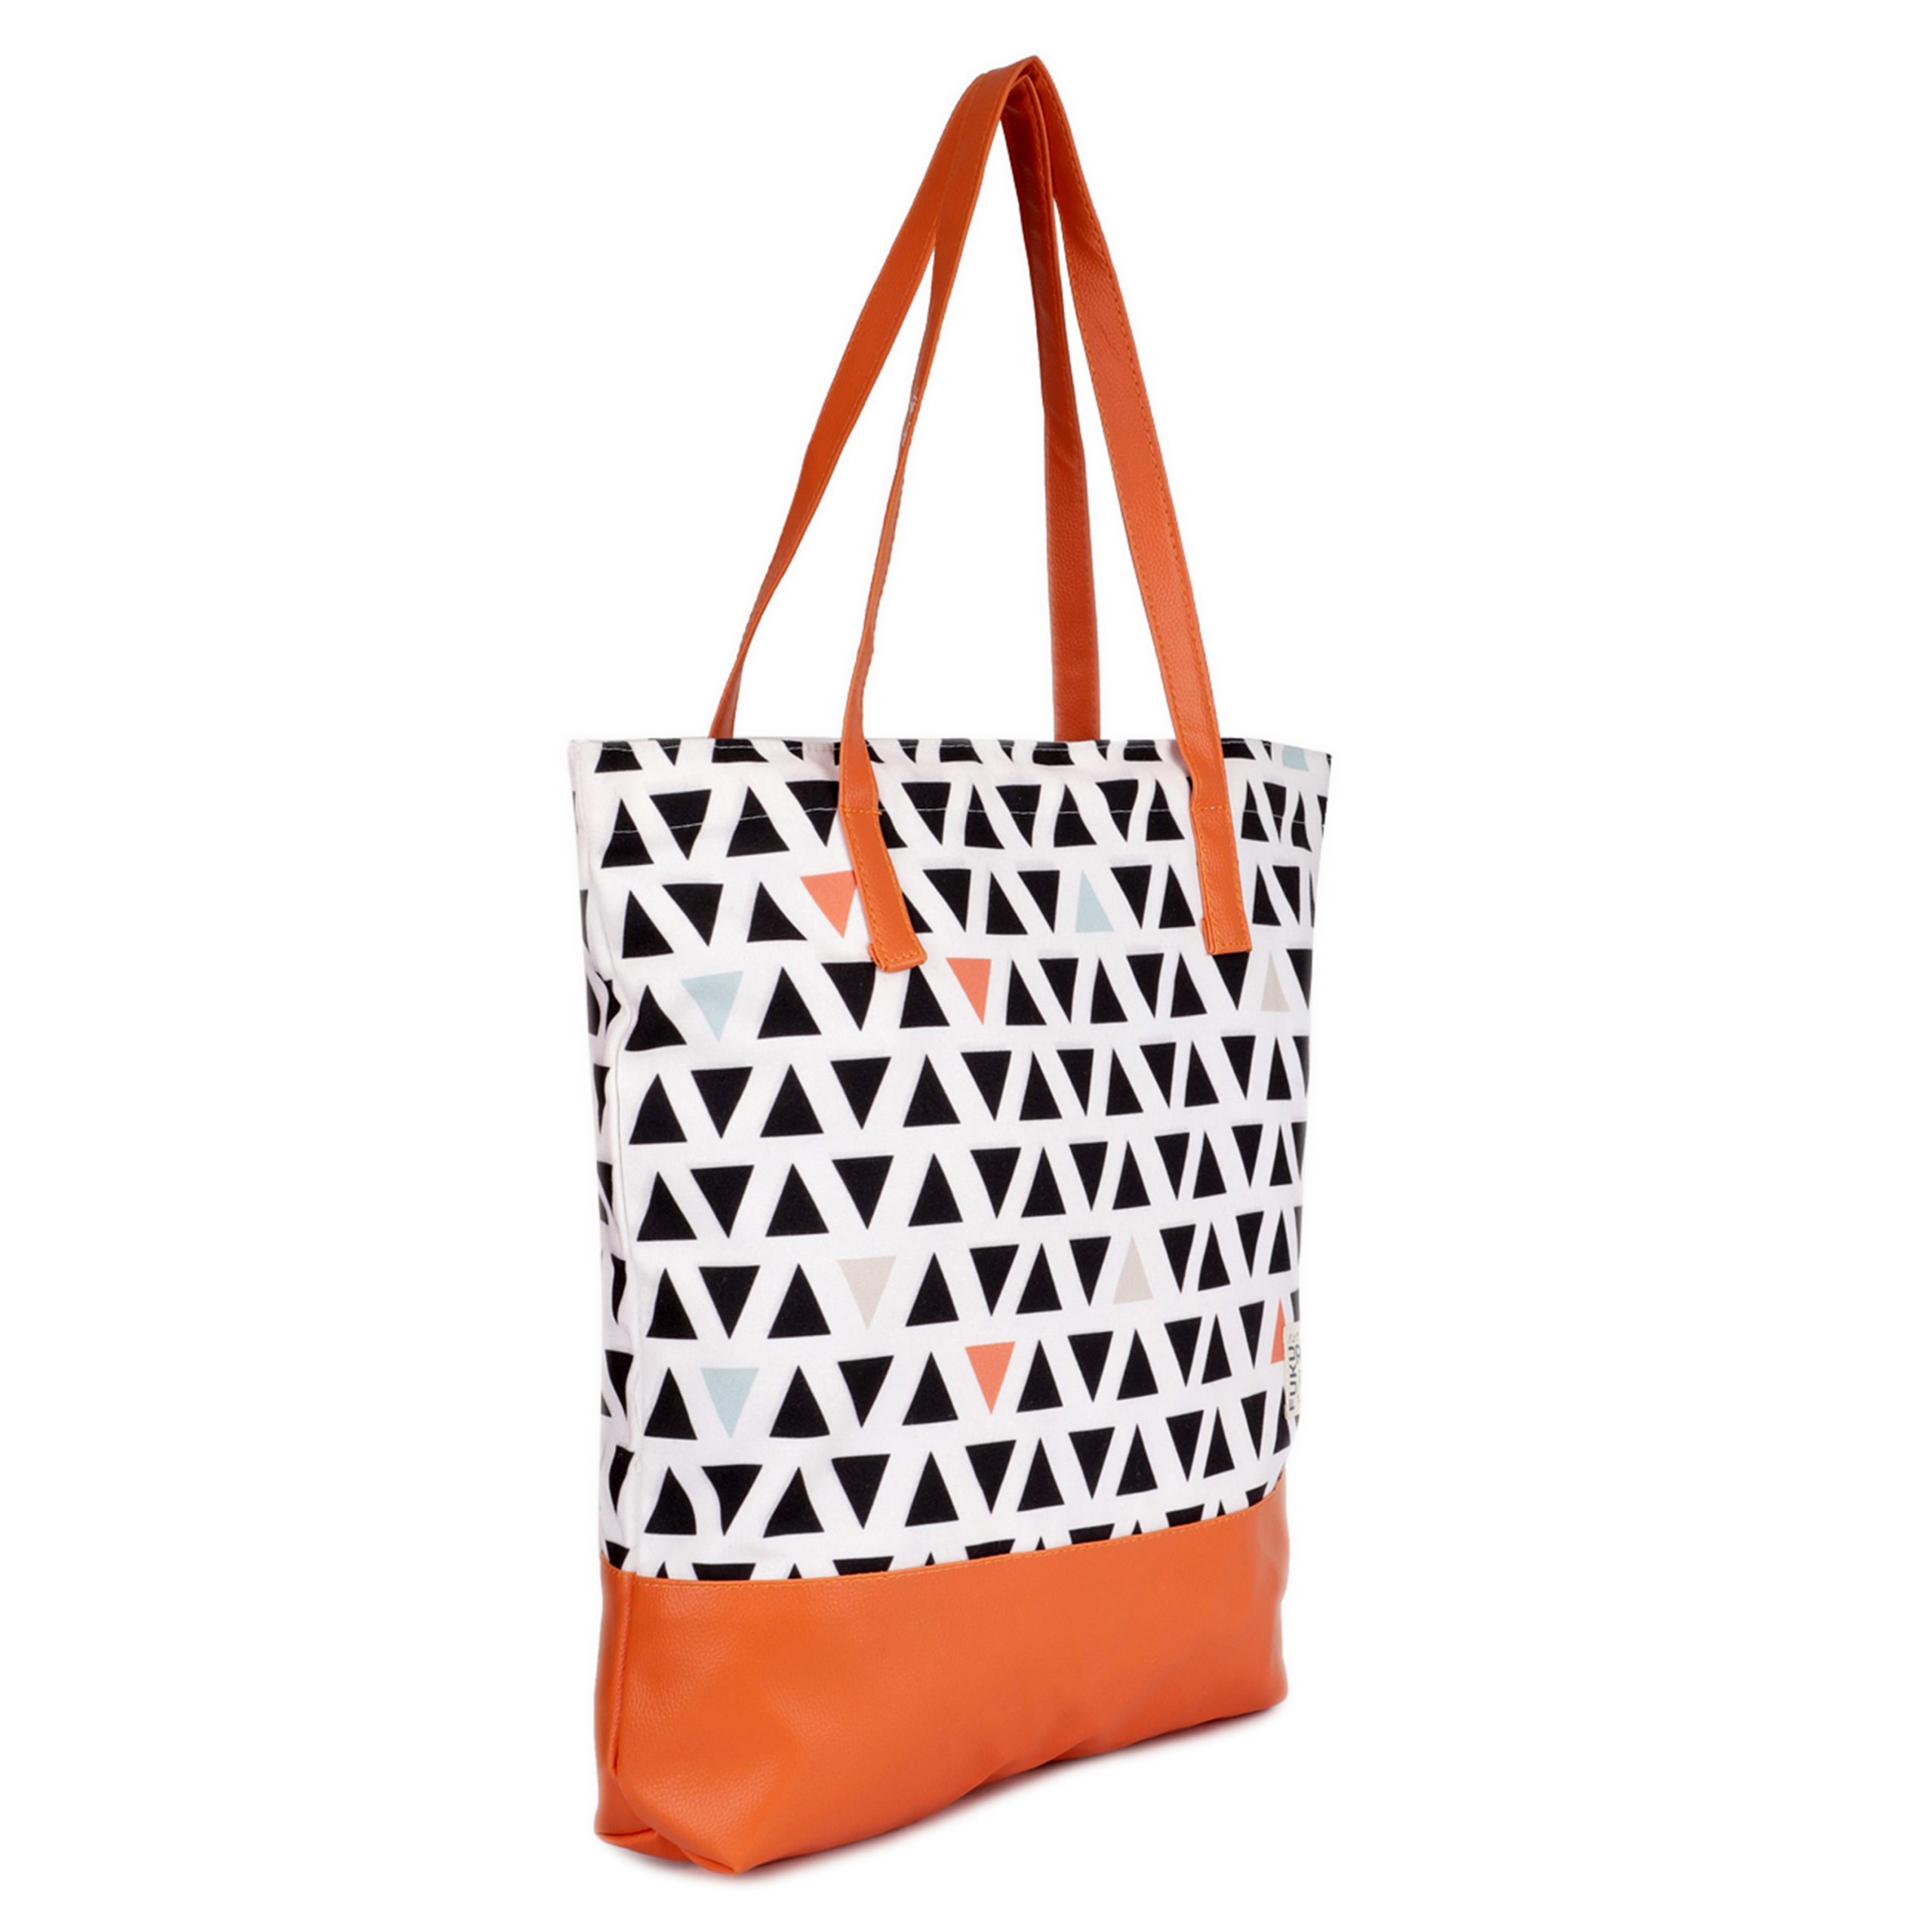 Custom Print Canvas Tote Bags | Shopping Bags | Grocery Bags